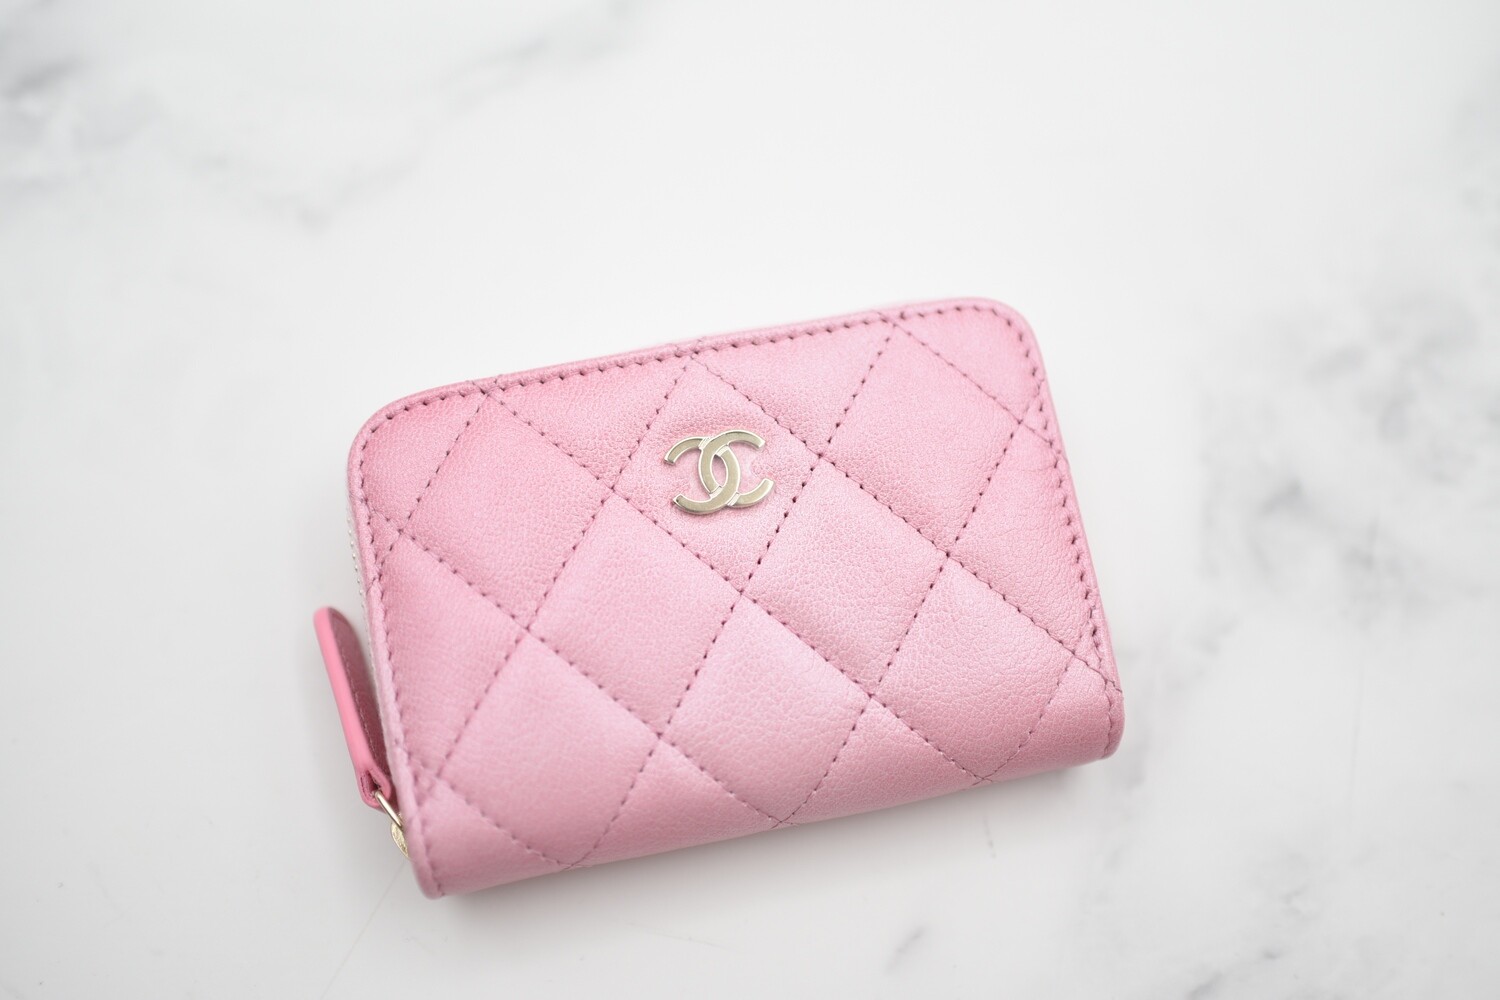 Chanel Zippy Card Holder, 23S Iridescent Pink Leather with Gold Hardware,  New in Box GA001